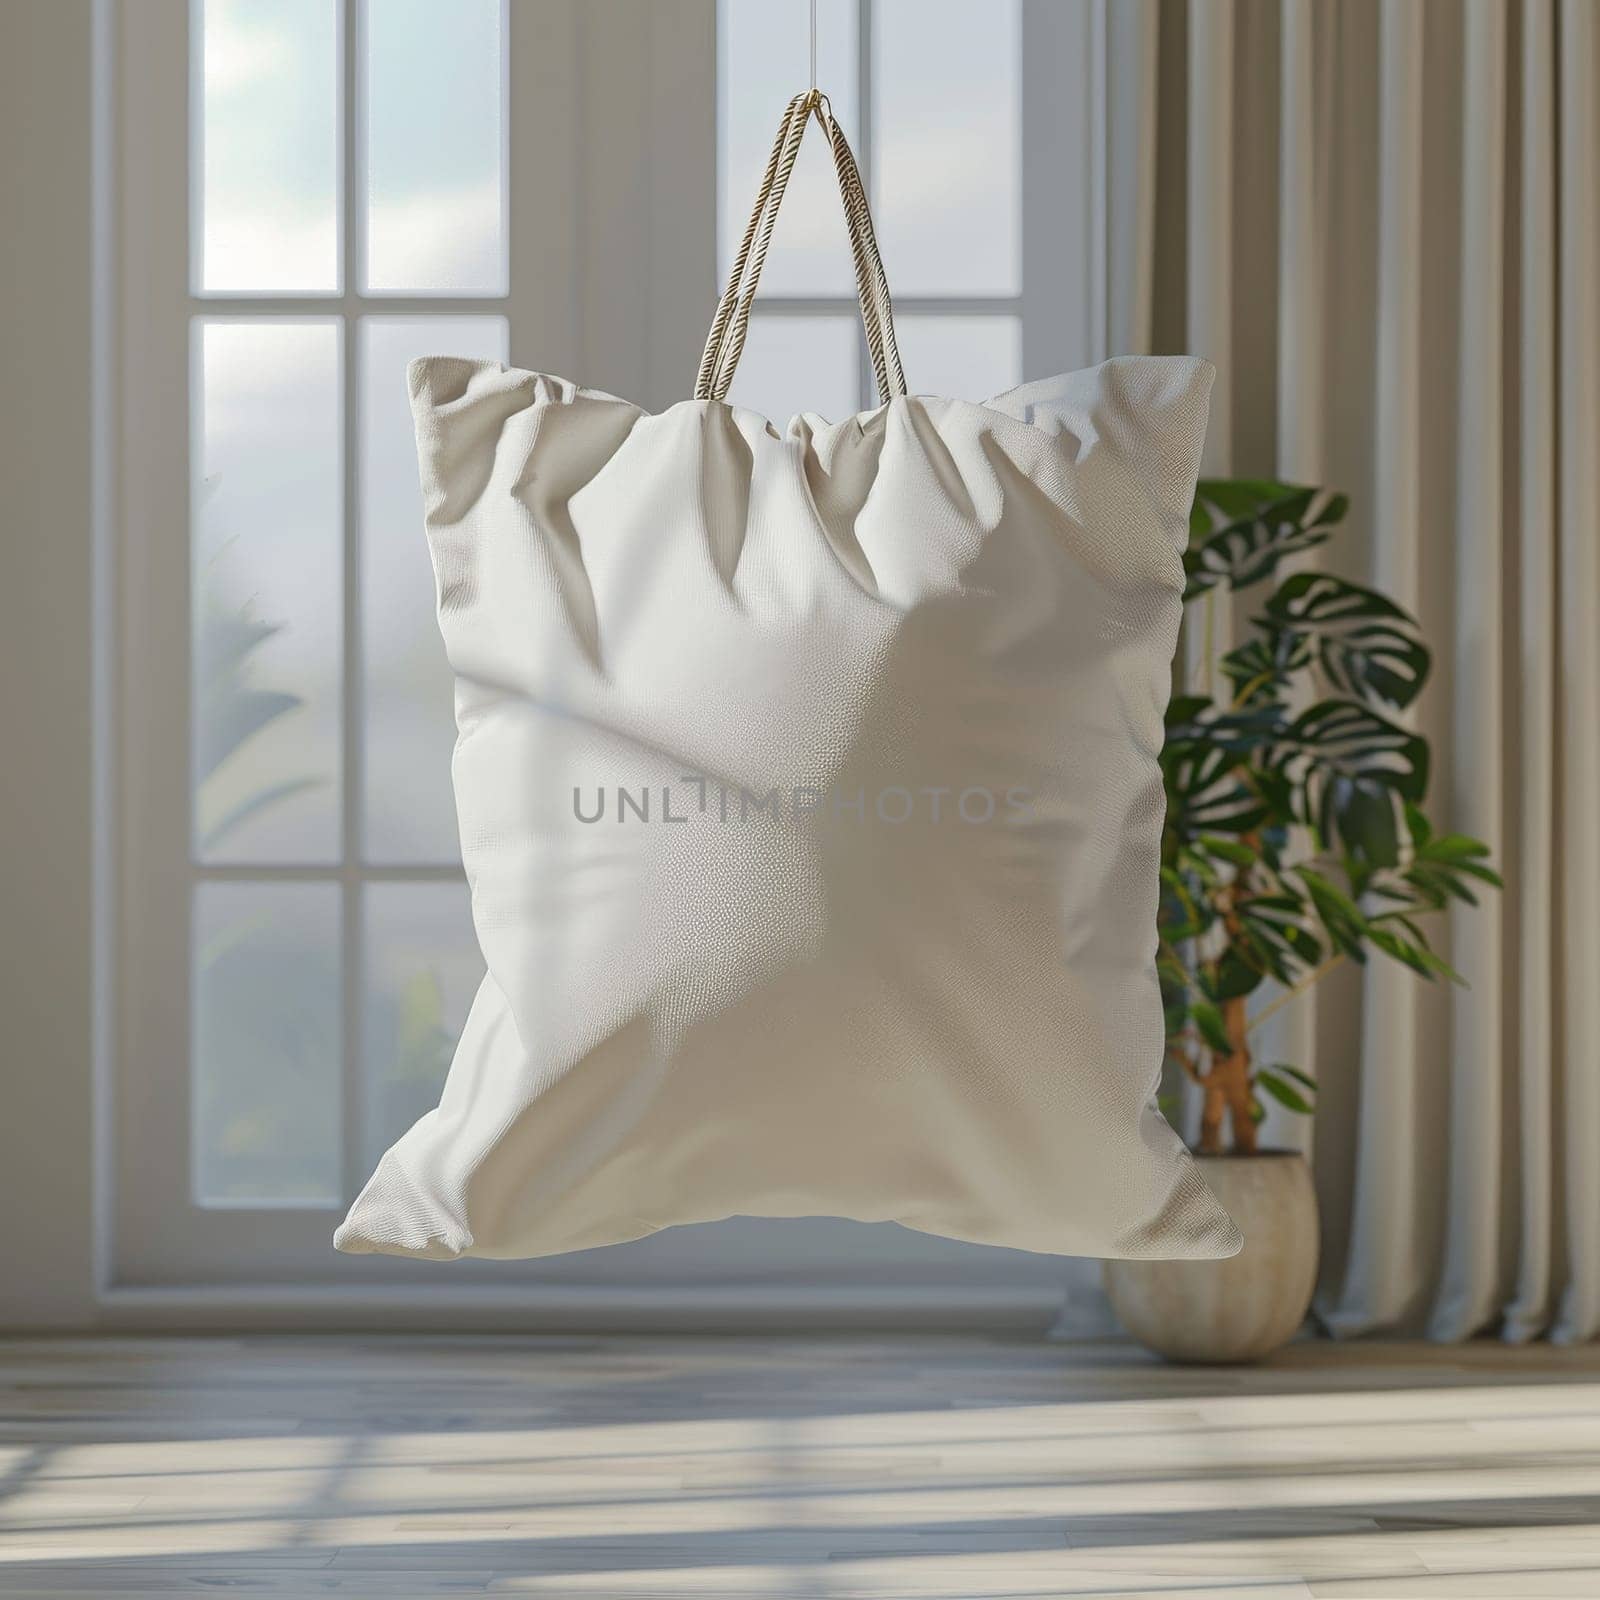 A white tote bag is hanging from a window sill by itchaznong